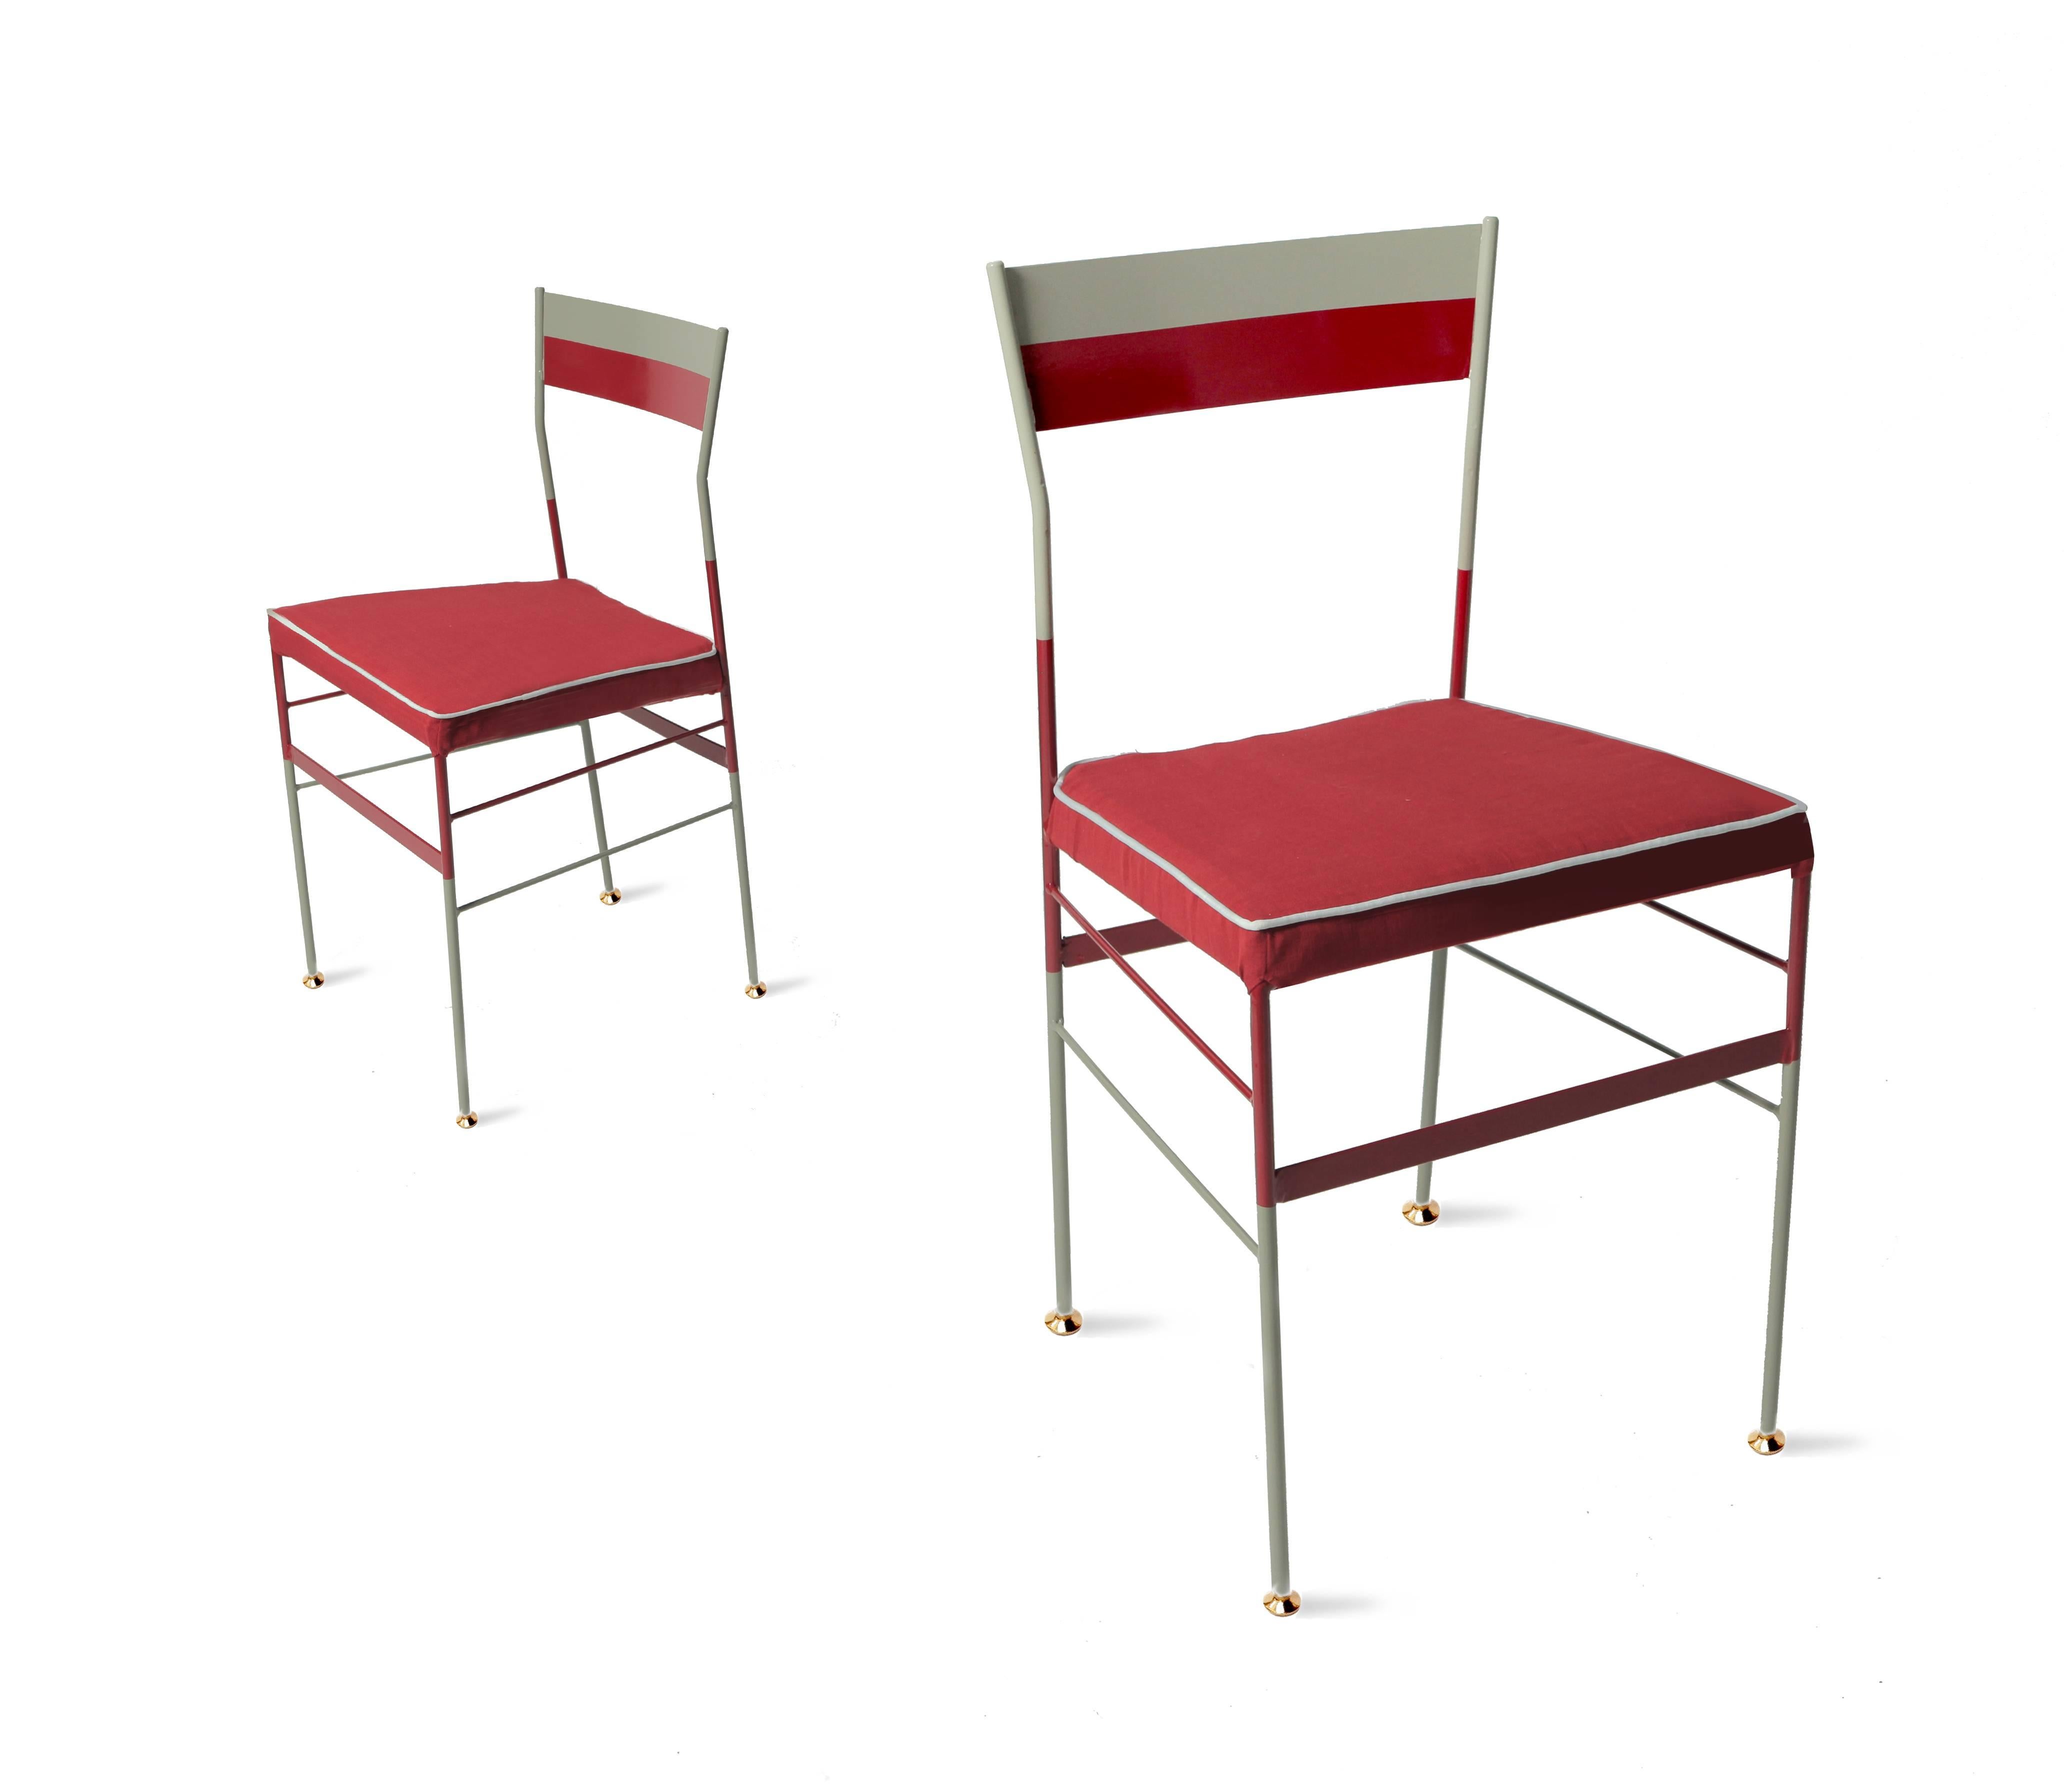 Other Pair of Pontina Red Chairs by Sotow, Made in Italy For Sale